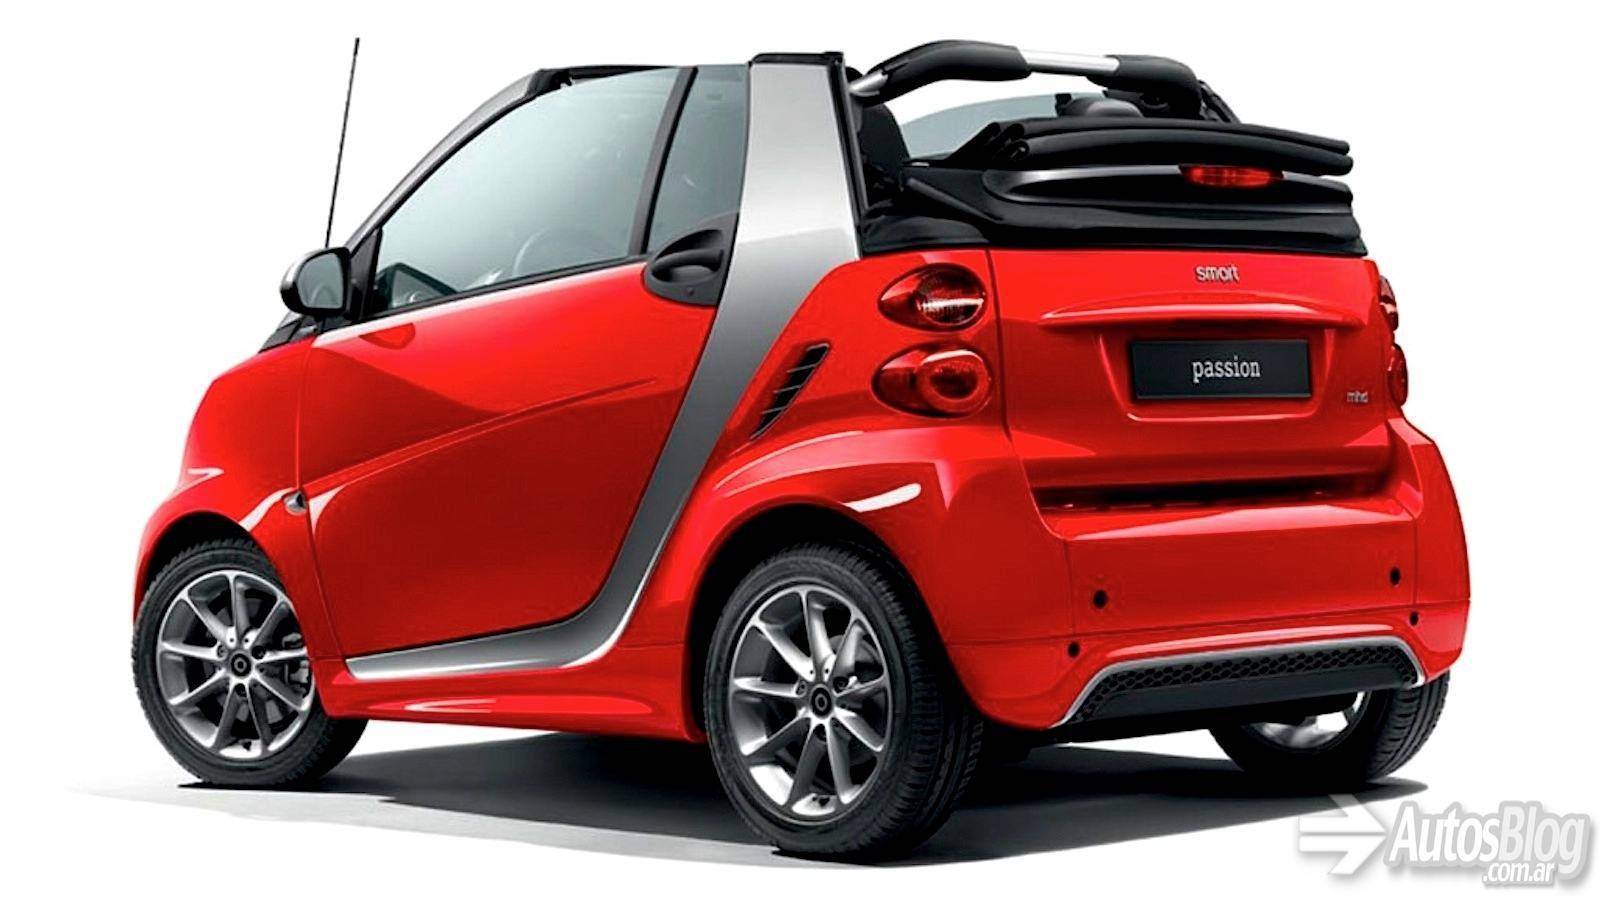 smart_fortwo_2012-04